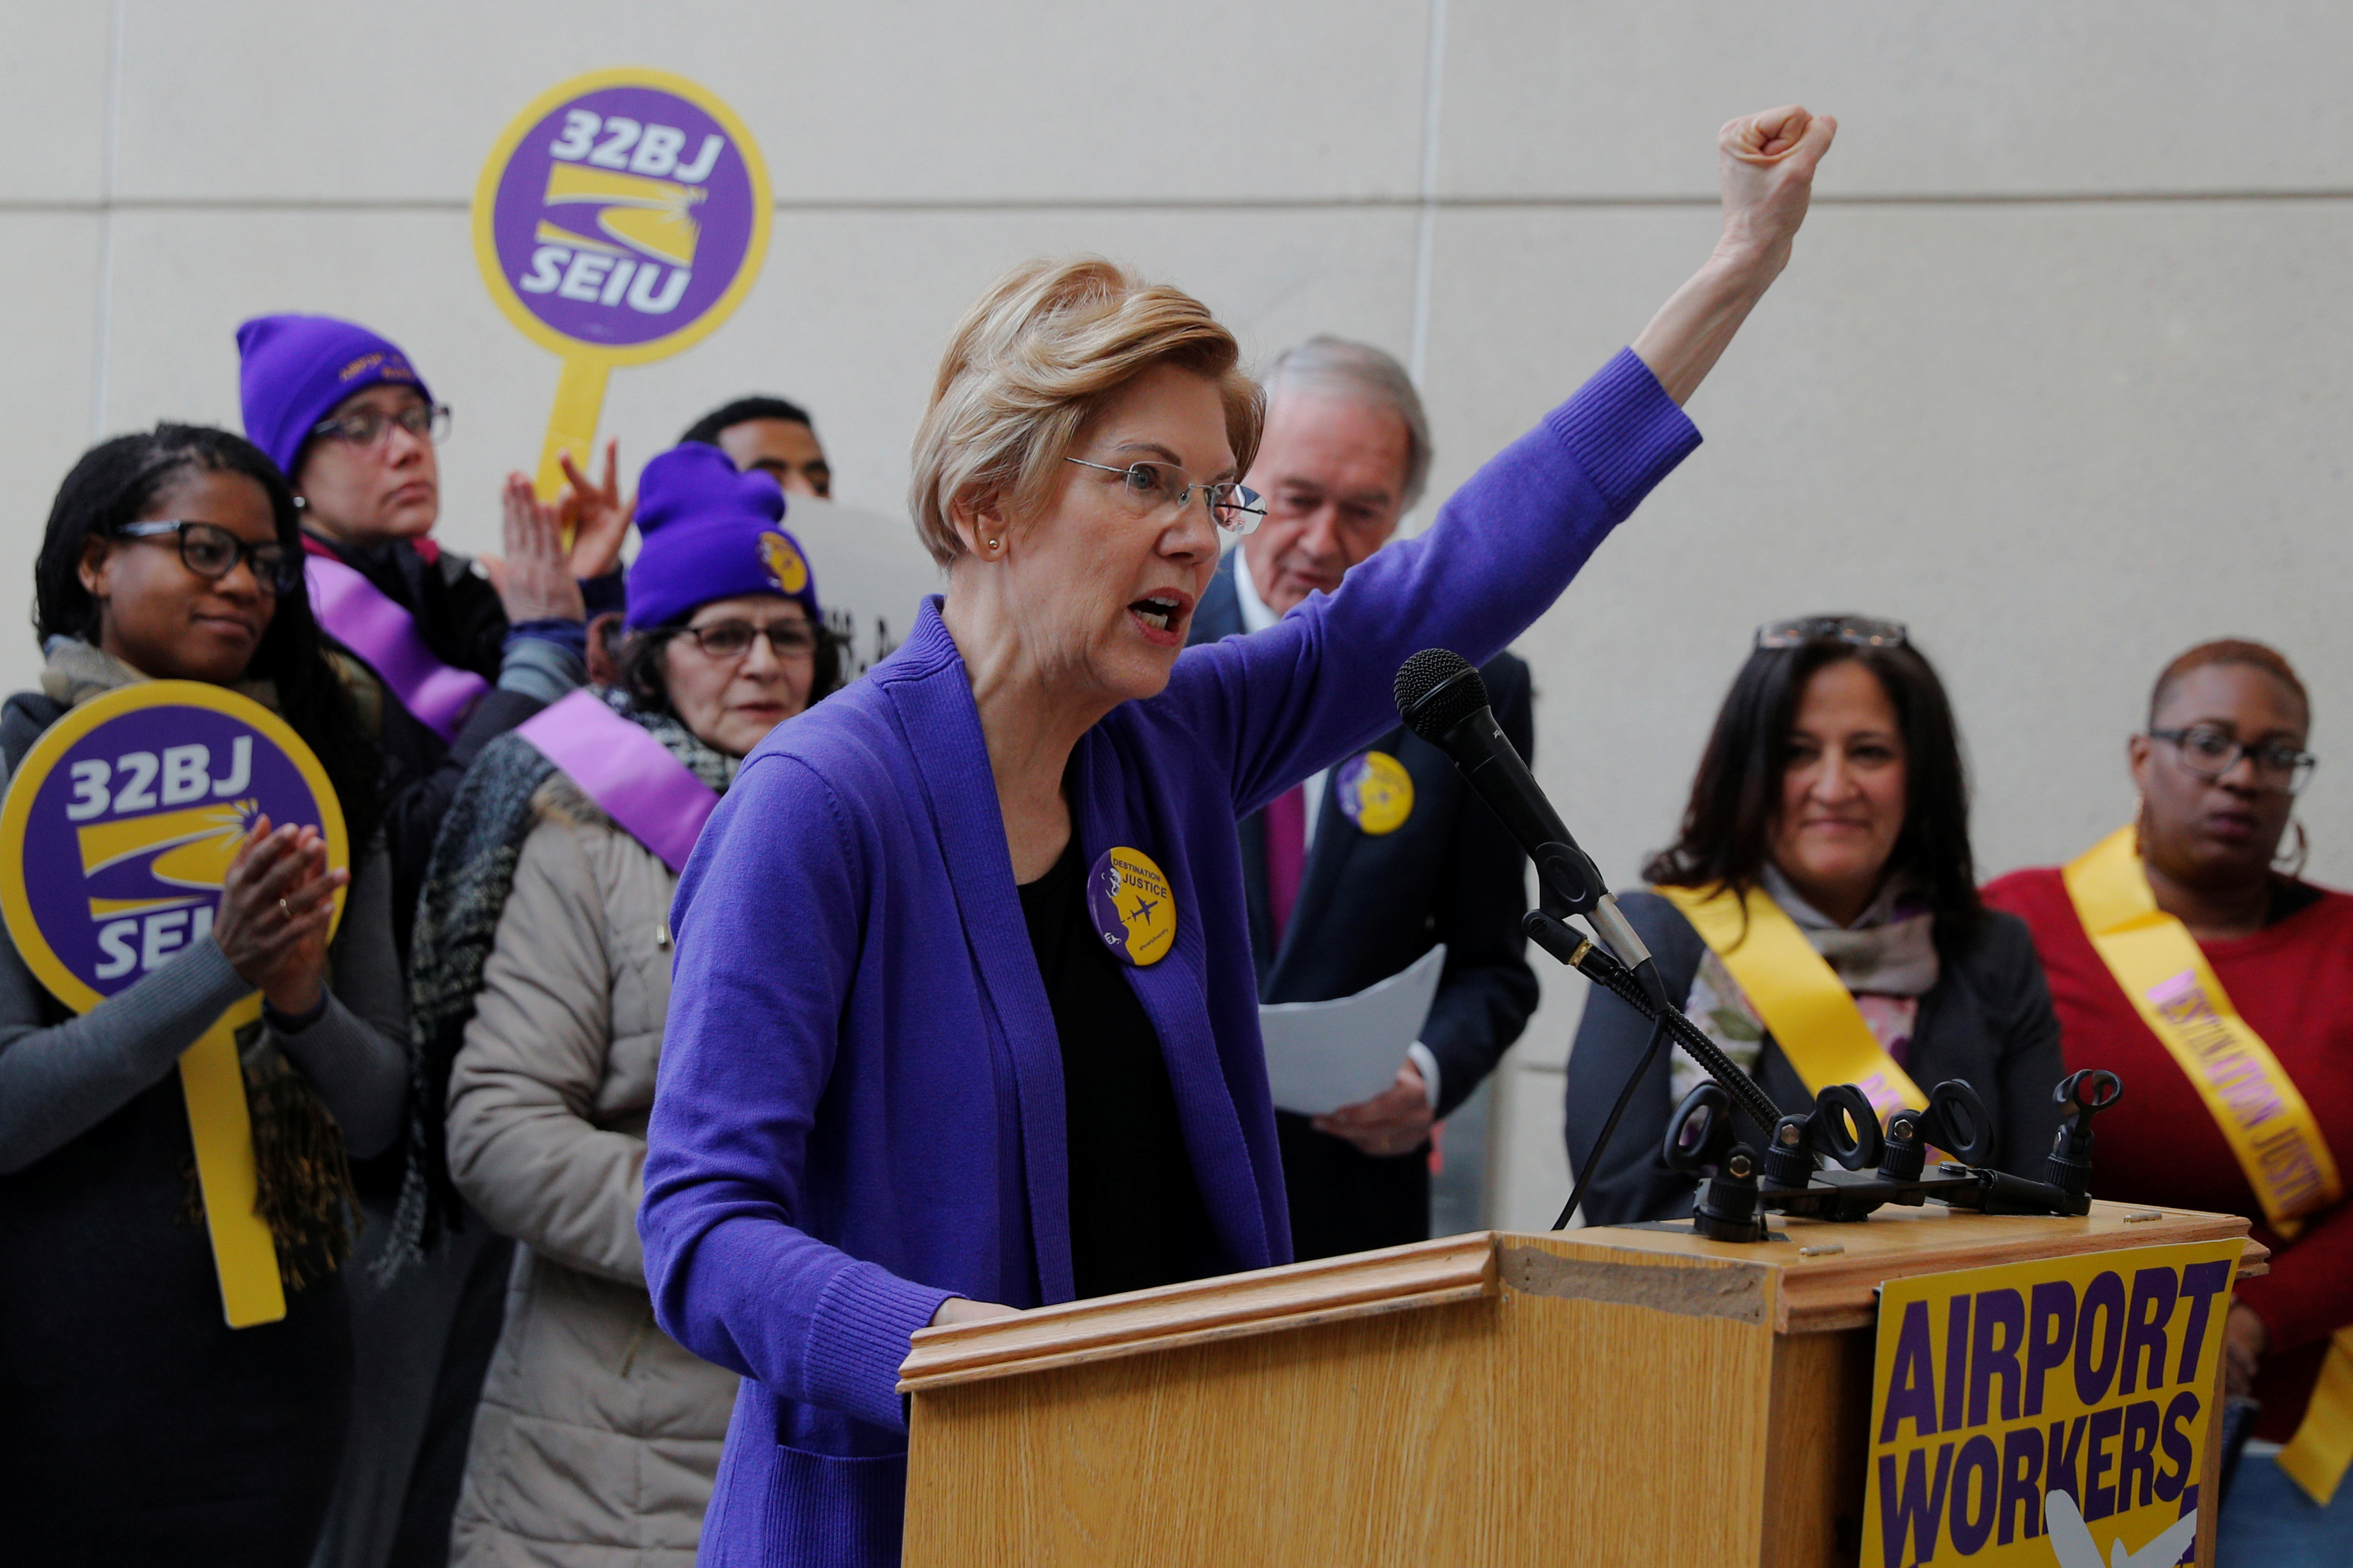 Potential 2020 Democratic presidential candidate and U.S. Senator Elizabeth Warren (D-MA) speaks about federal government employees working without pay and workers trying to unionize at Logan Airport in Boston, Massachusetts, U.S., January 21, 2019. REUTERS/Brian Snyder - RC14E73DE420